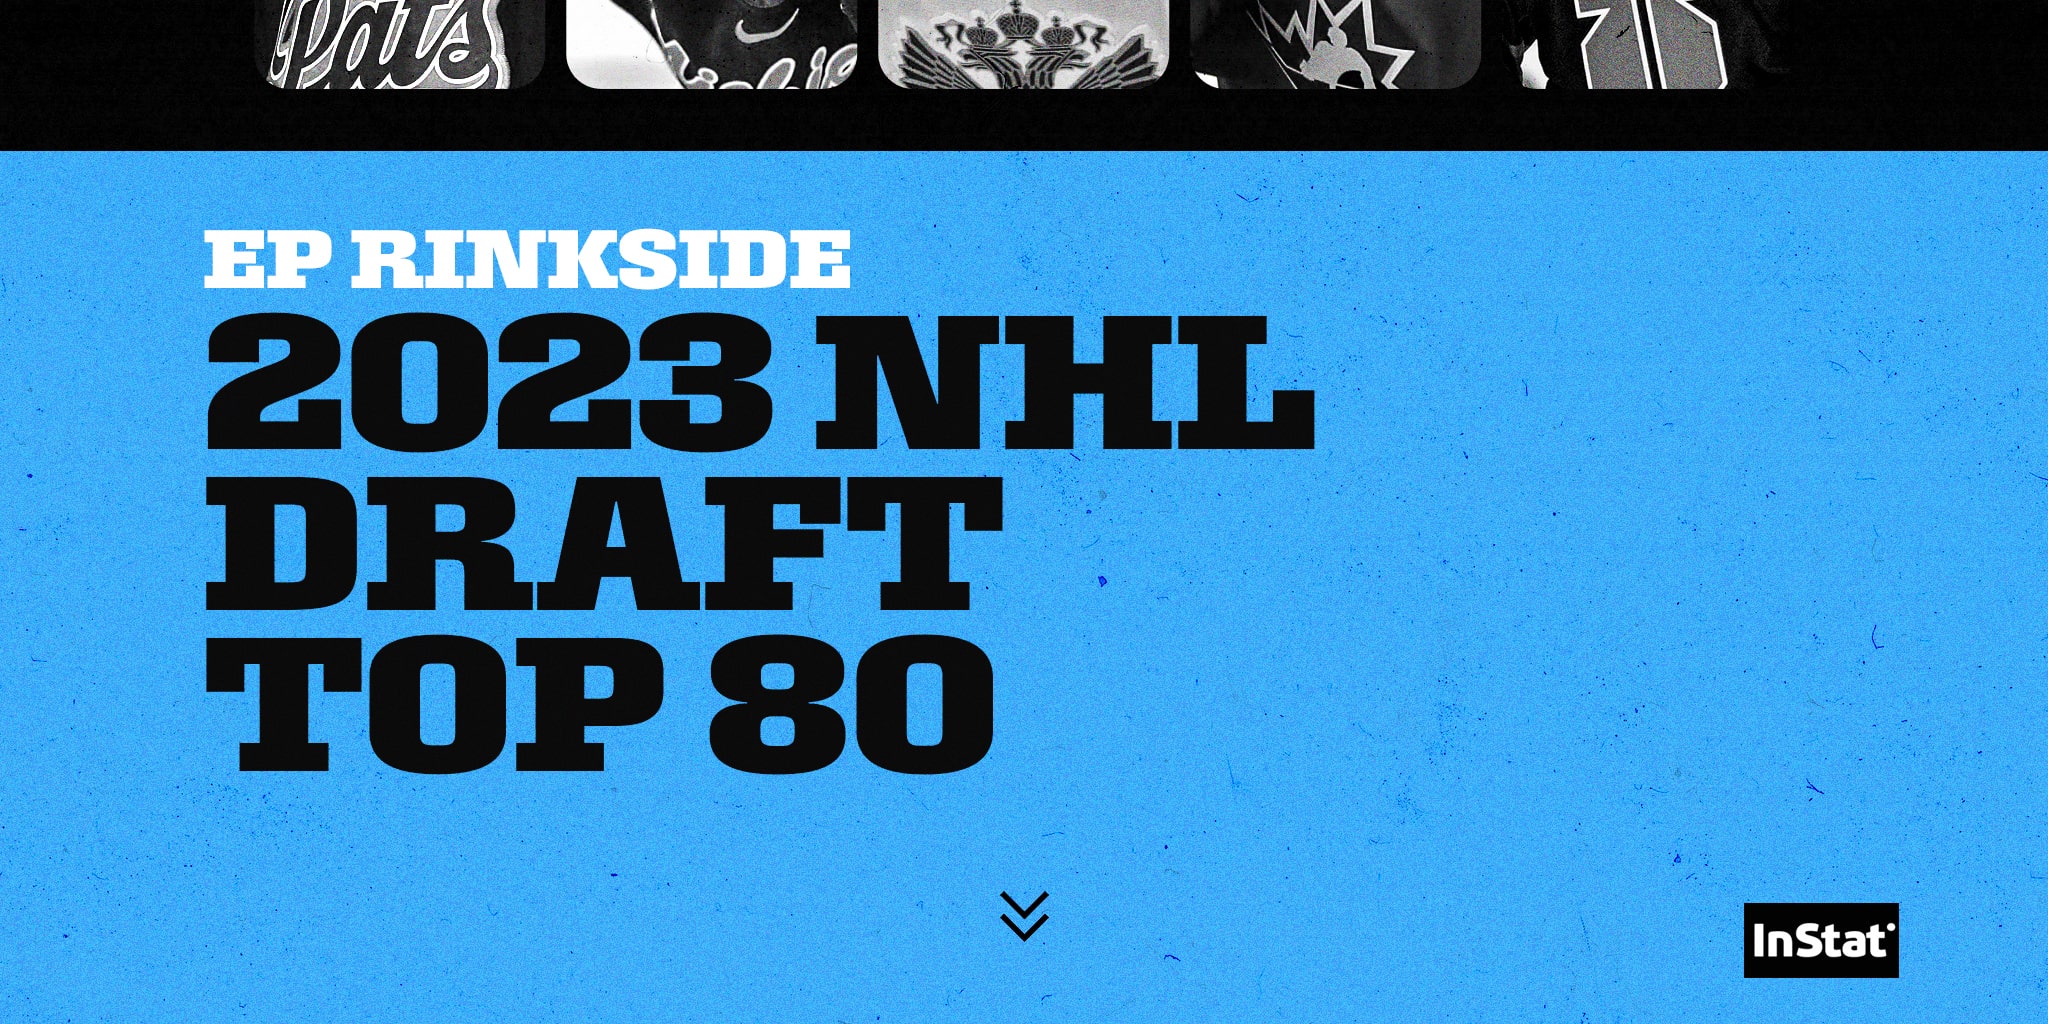 The Elite Prospects pre-U18 ranking of the top 80 prospects in the 2023 NHL Draft